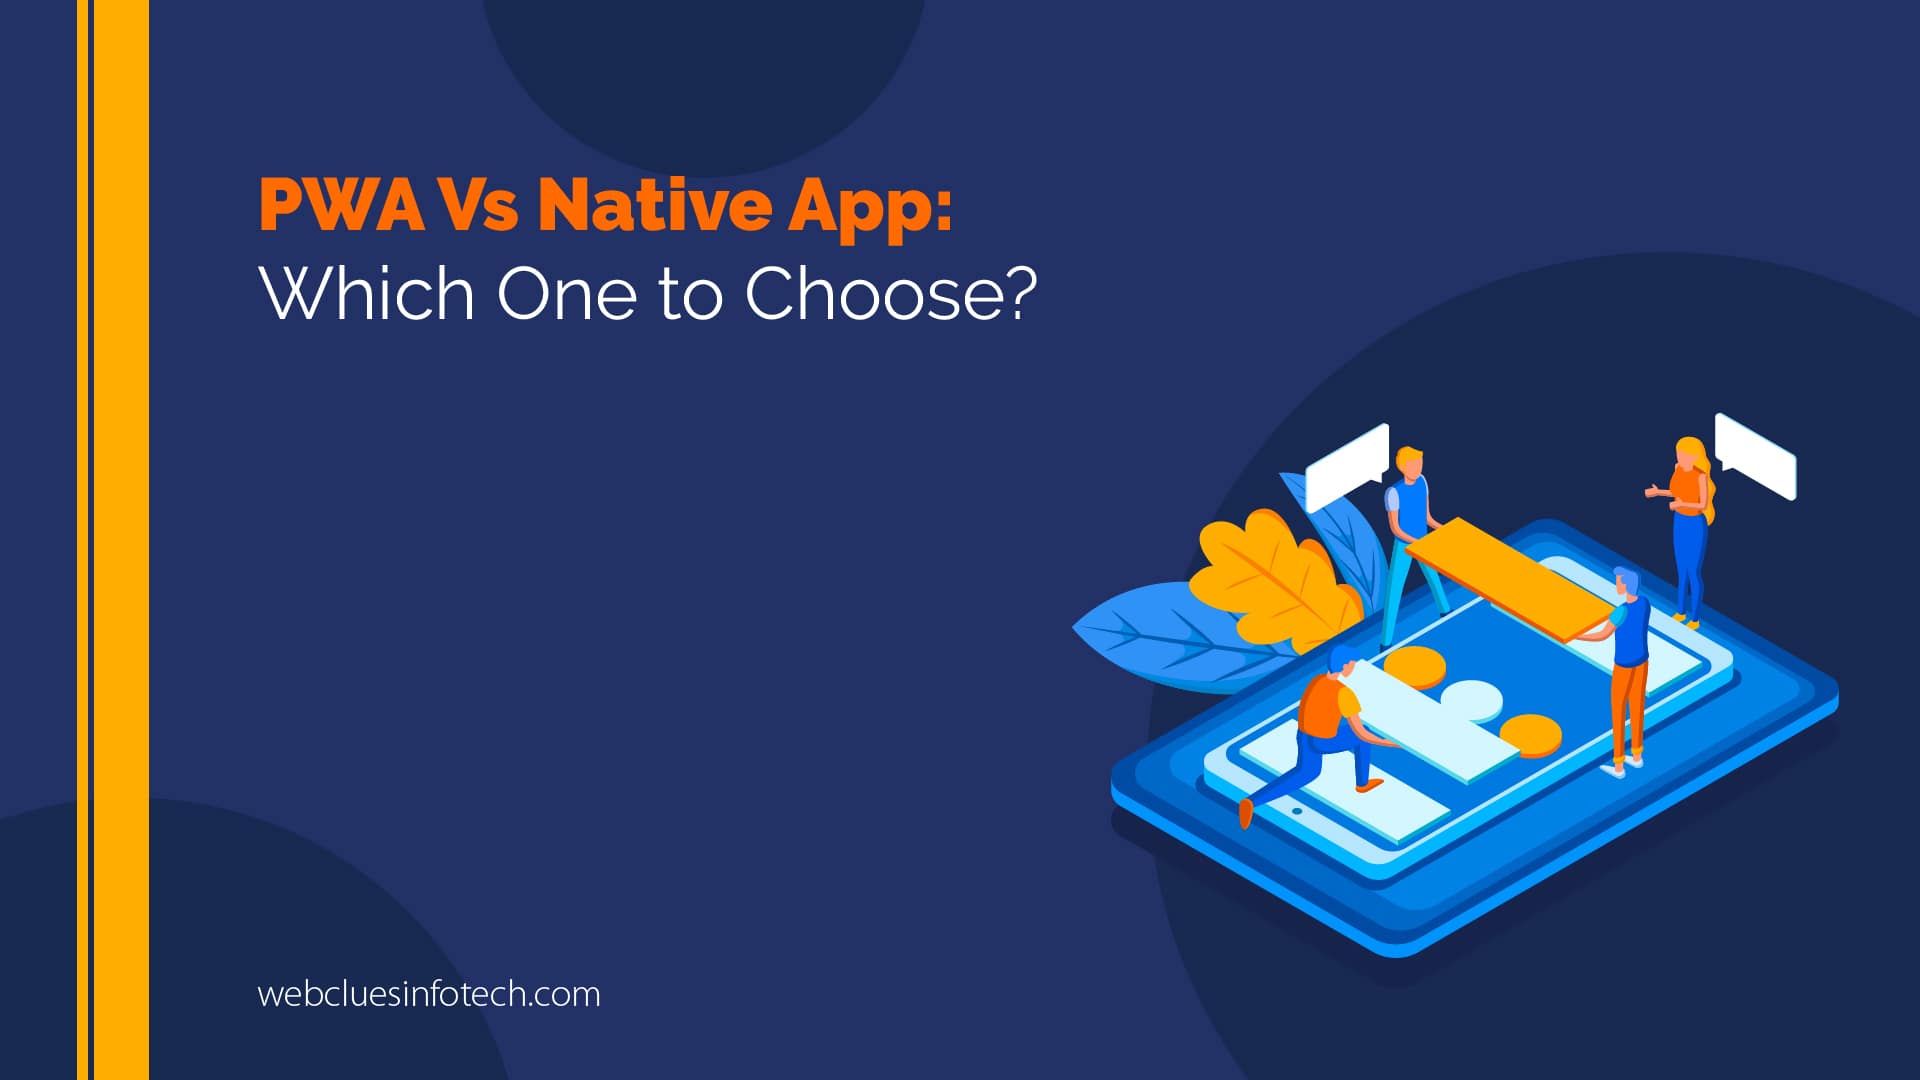 PWA Vs Native App, Which One to Choose?